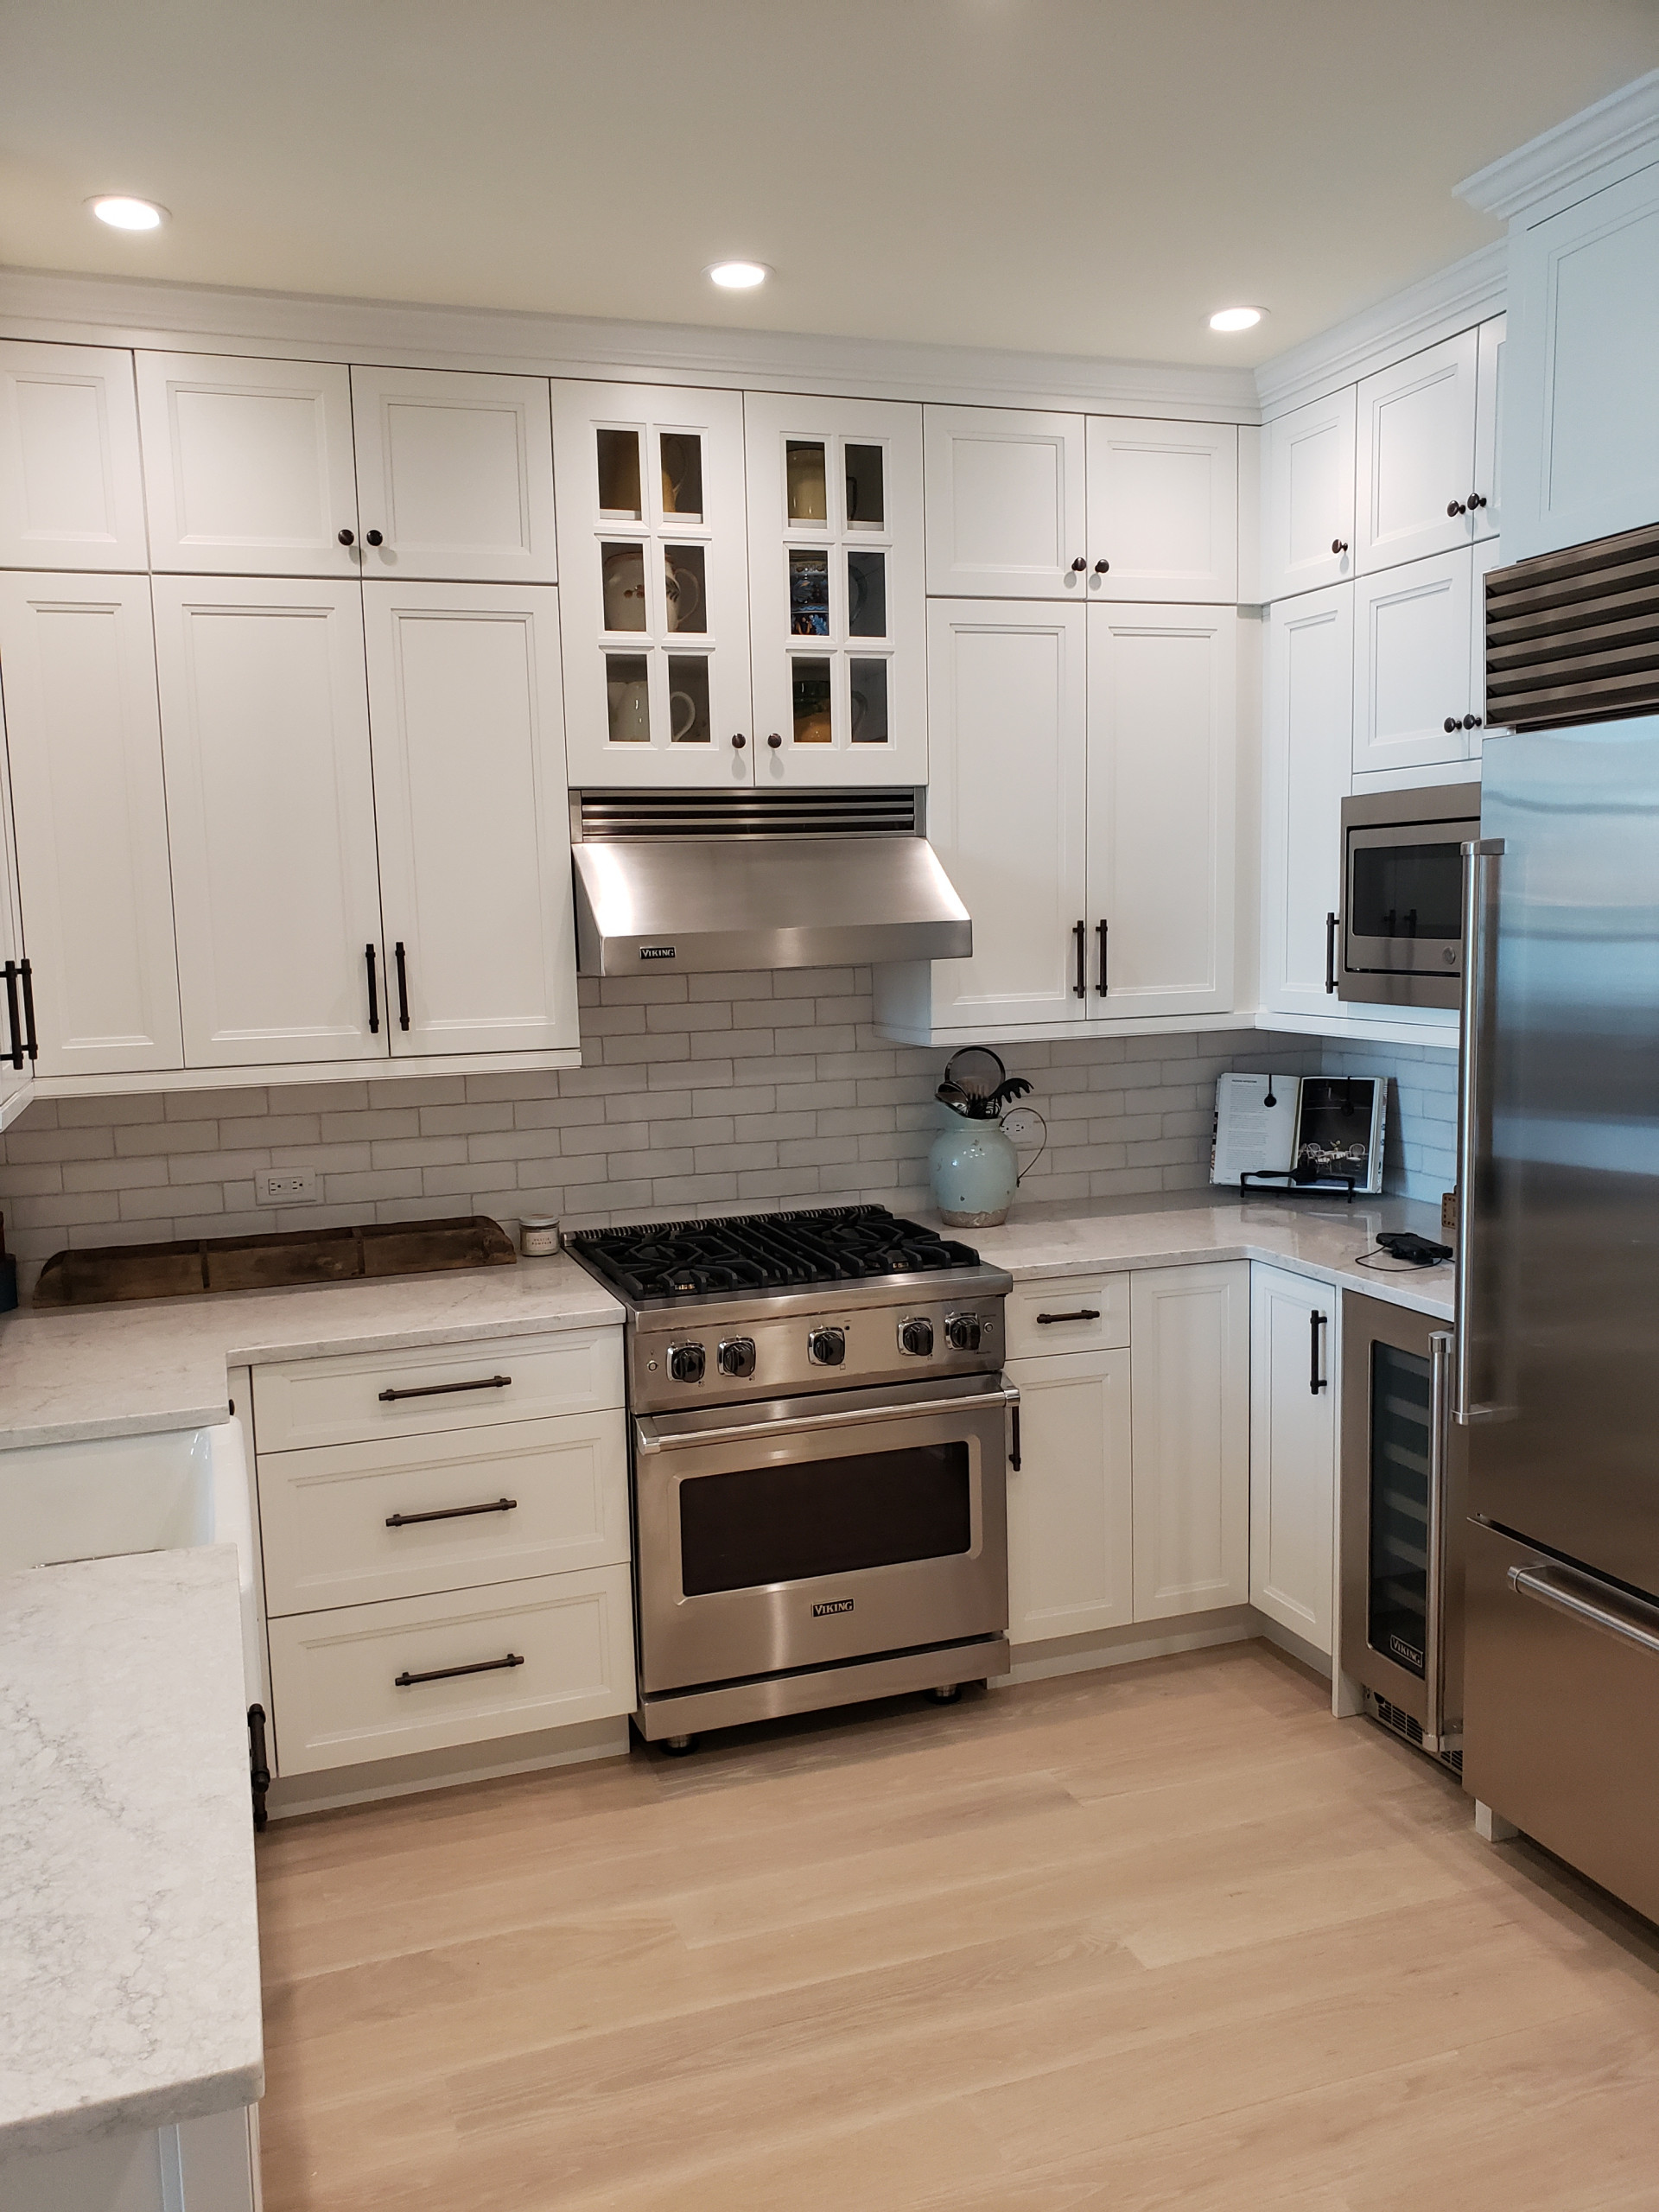 Maxwell Place Kitchen Remodel - Hoboken